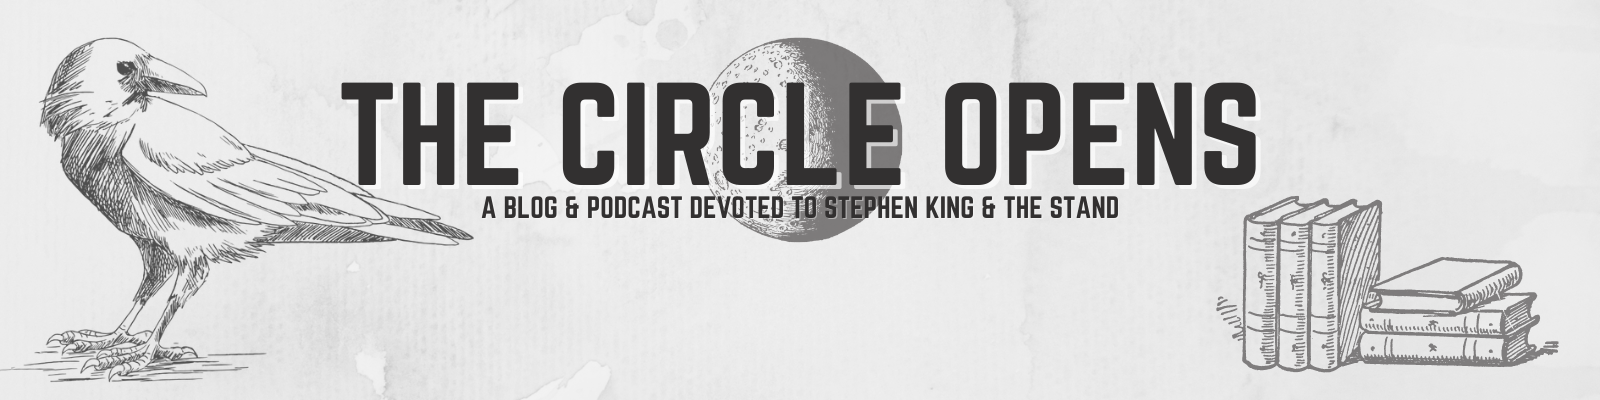 The Circle Opens: A Podcast Devoted to Stephen King and His Works